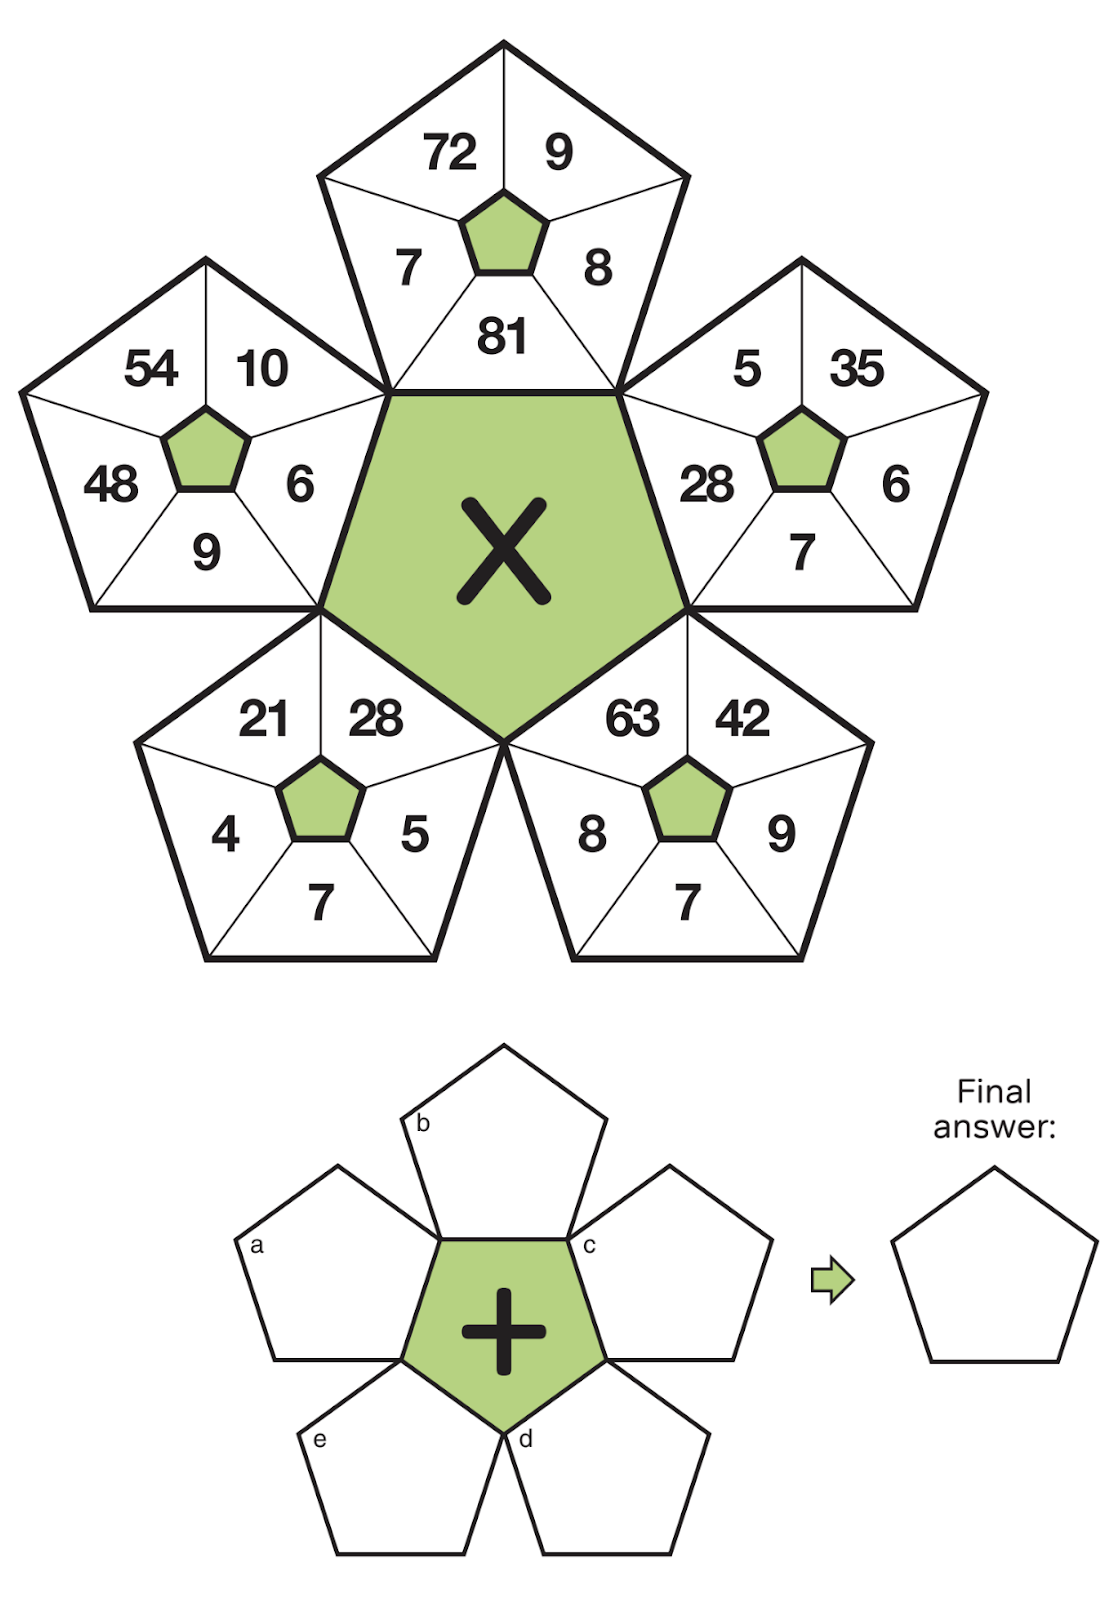 An unsolved two part kakooma puzzle, with each part made up of 5 connected pentagons. The first part has five pentagonal sections containing five numbers each. The top-middle section contains 7, 8, 9, 72, and 81, the top-right section contains 5, 6, 7, 28, and 35, the bottom-right section contains 7, 8, 9, 42, and 63, the bottom-left section contains 4, 5, 7, 21, and 28, and the top-left section contains 6, 9, 10, 48, and 54. The second part has five smaller, blank connected pentagons, labelled a-e, followed by an arrow pointing to the final answer box.